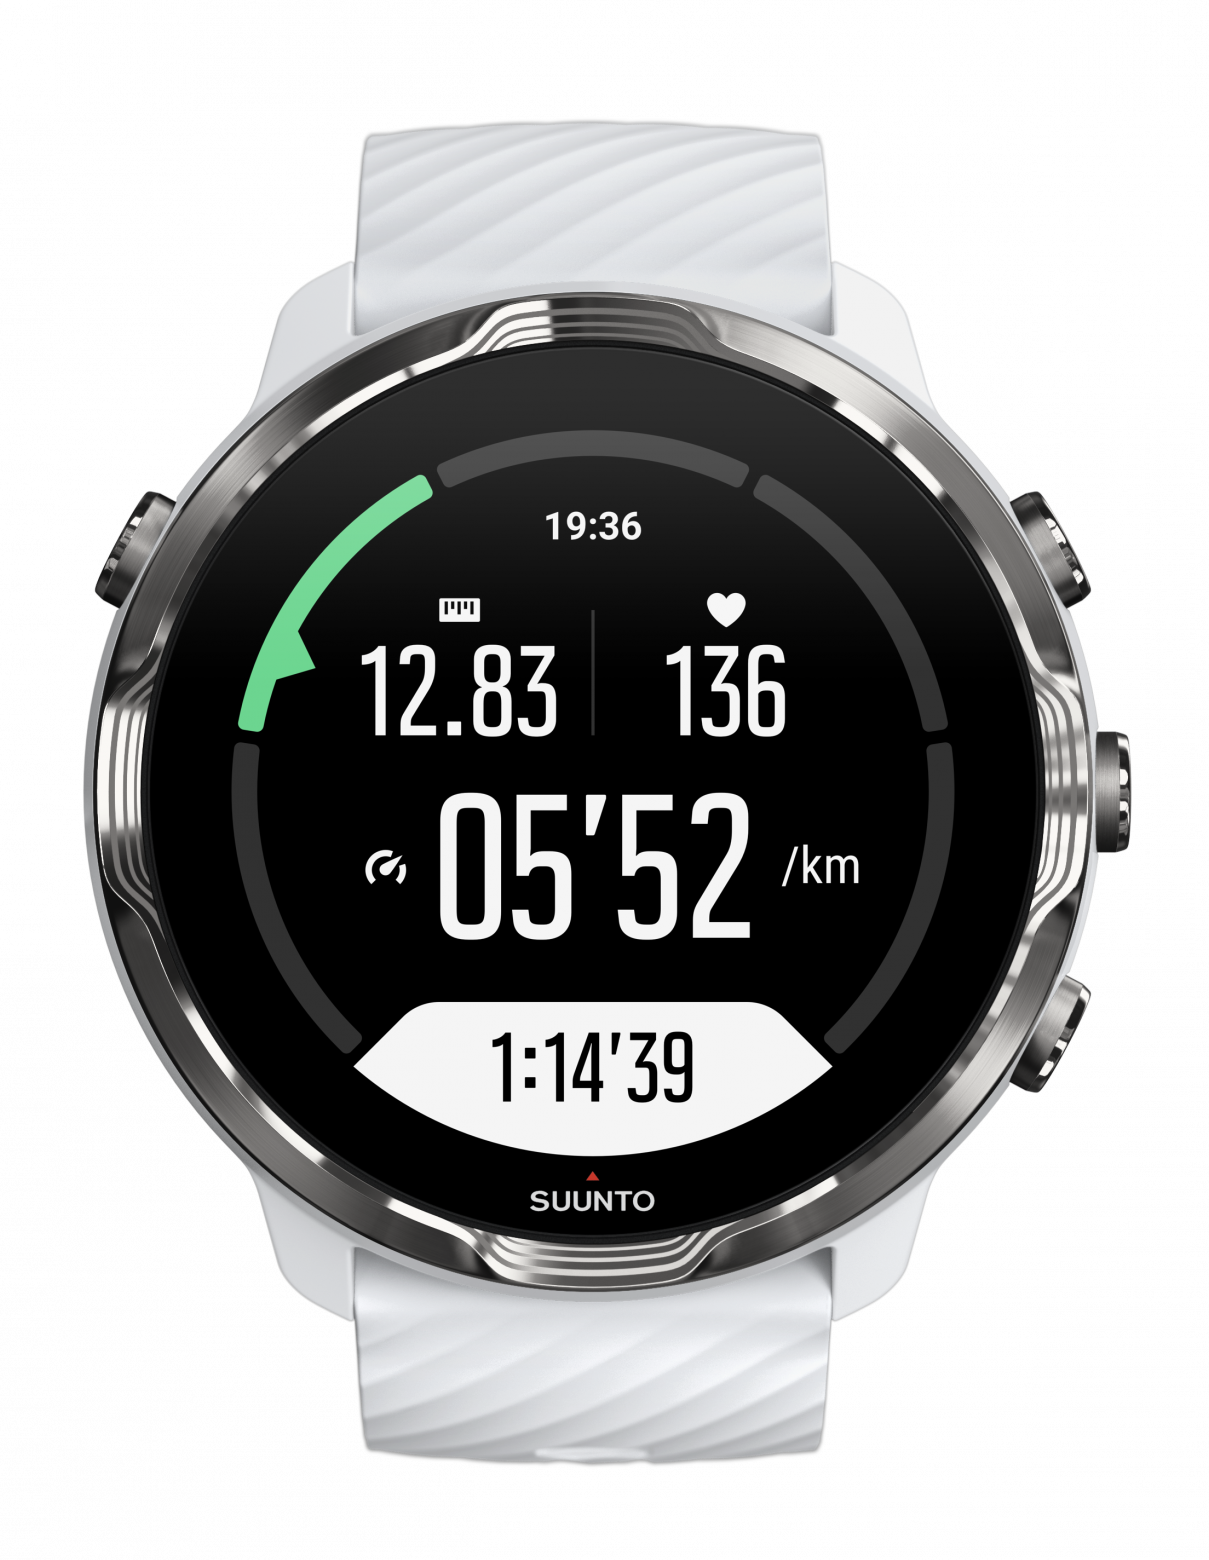 Suunto Closes The Gap On Garmin In Race To Dominate Sporting Smartwatch ...